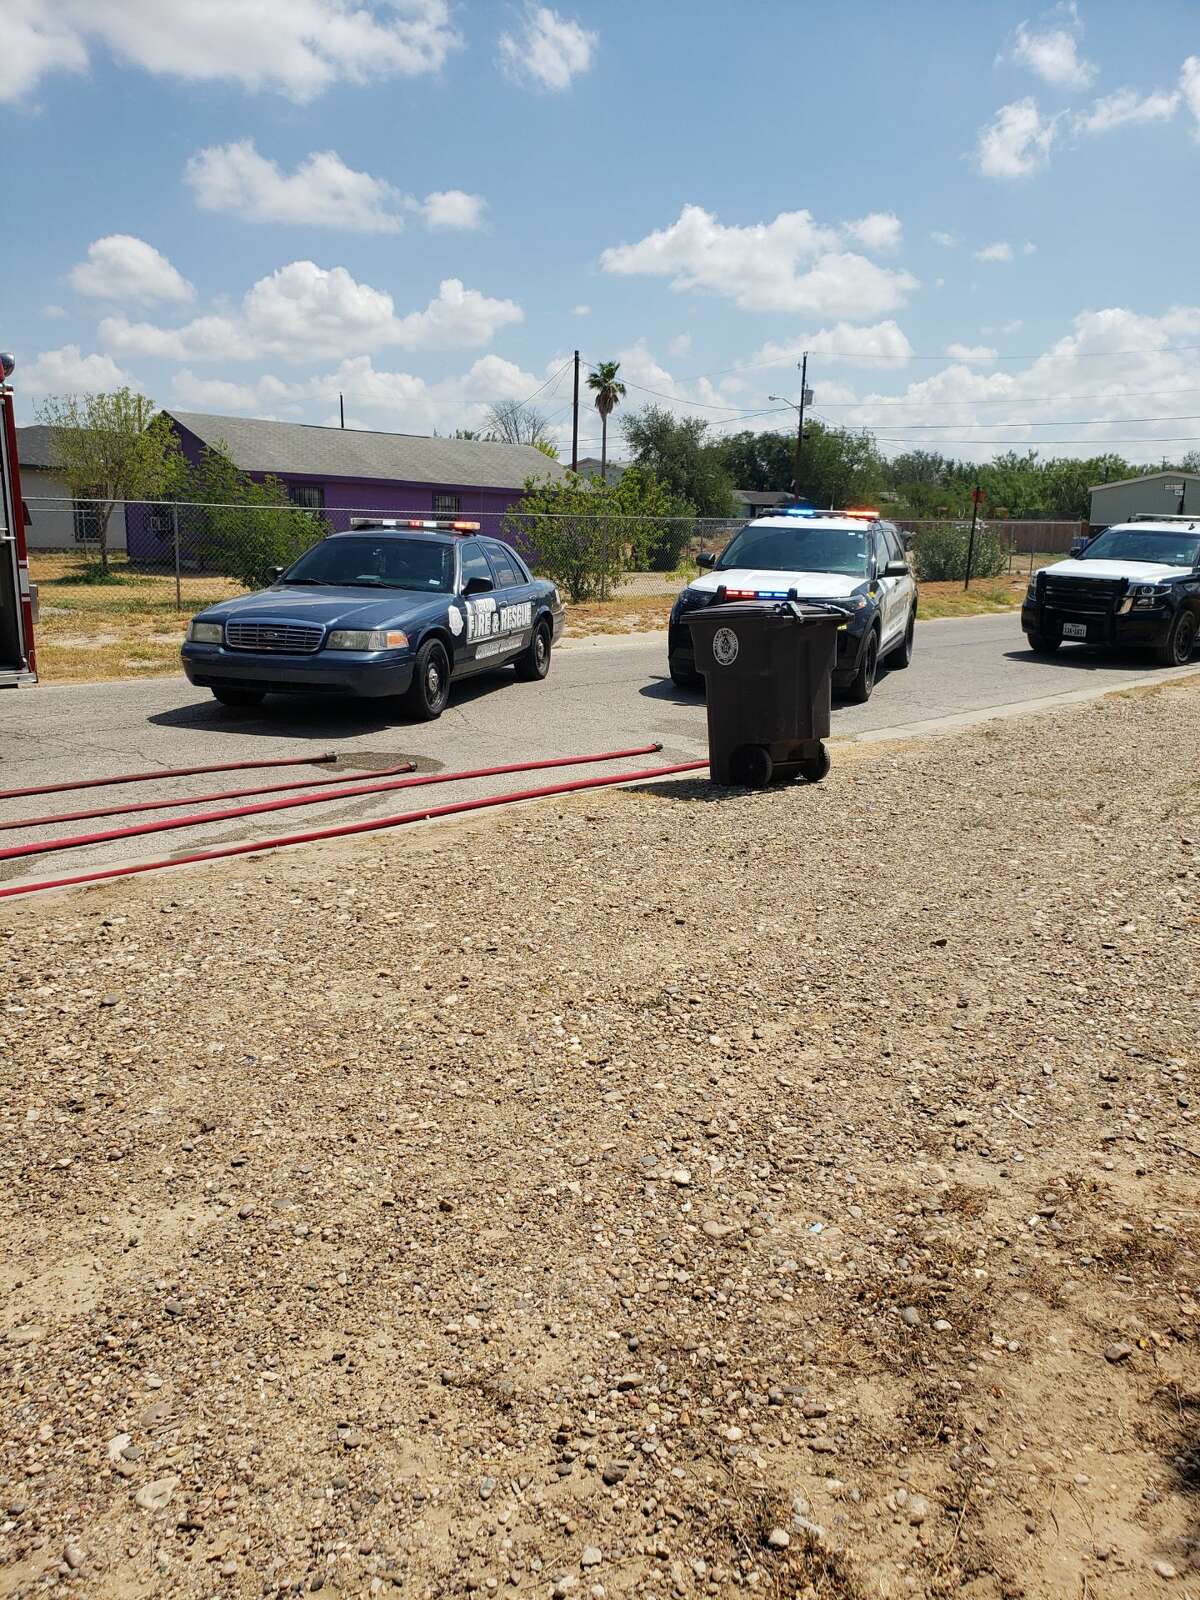 A house fire in El Cenizo, Texas around 11 a.m. in the morning on Thursday July 14, 2022 caused the burning down of a room in the home. Preliminary investigations state that the fire began because of bad wiring. 